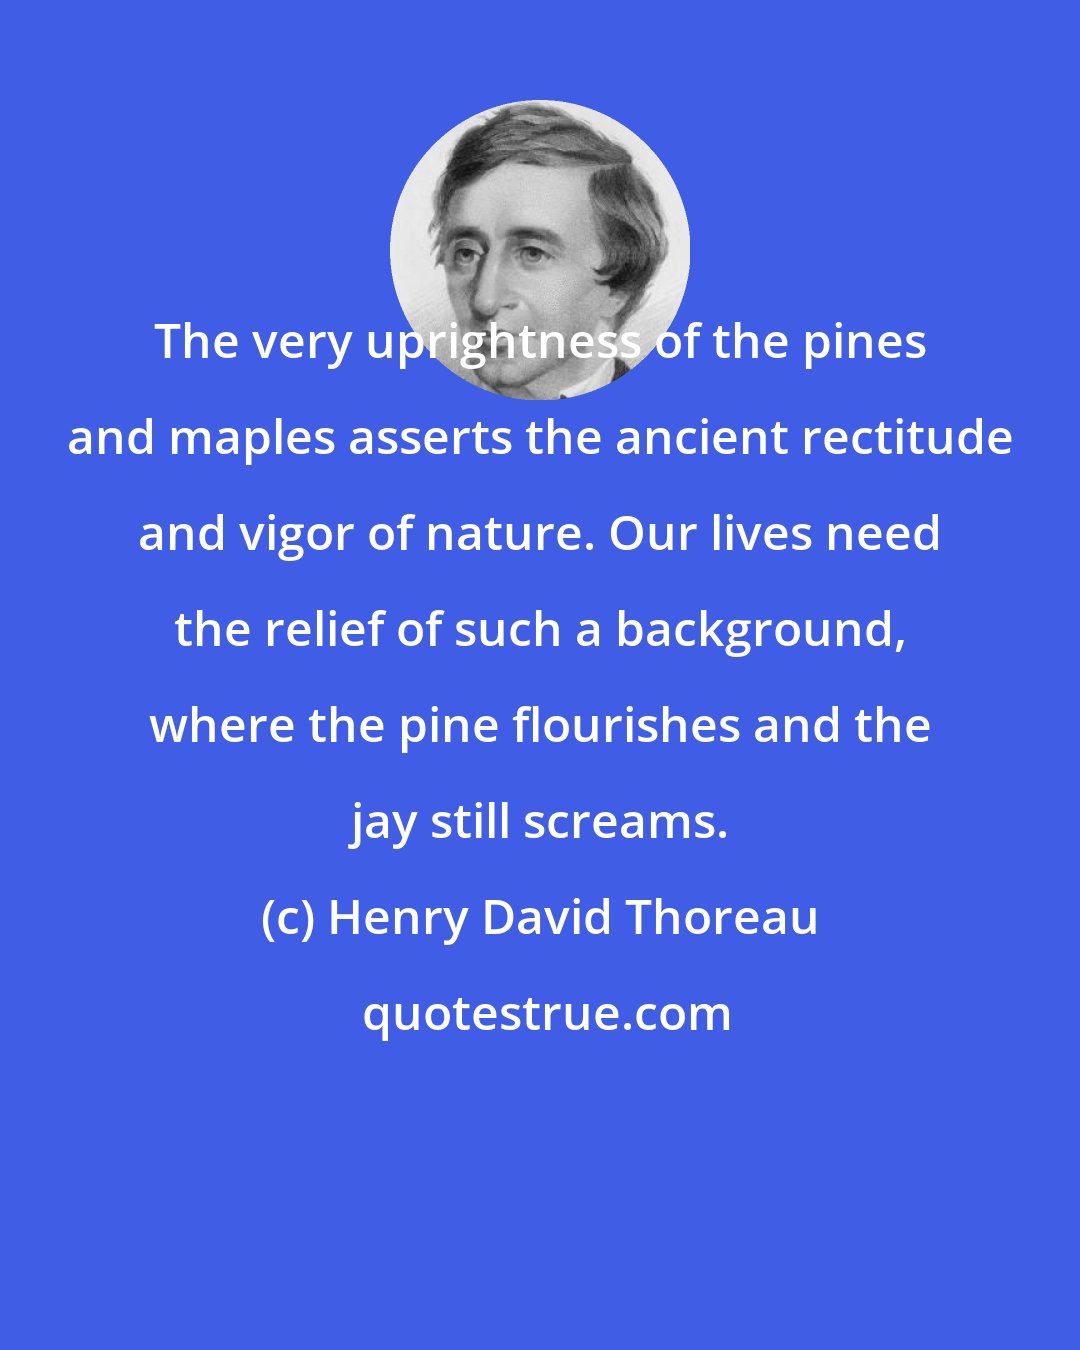 Henry David Thoreau: The very uprightness of the pines and maples asserts the ancient rectitude and vigor of nature. Our lives need the relief of such a background, where the pine flourishes and the jay still screams.